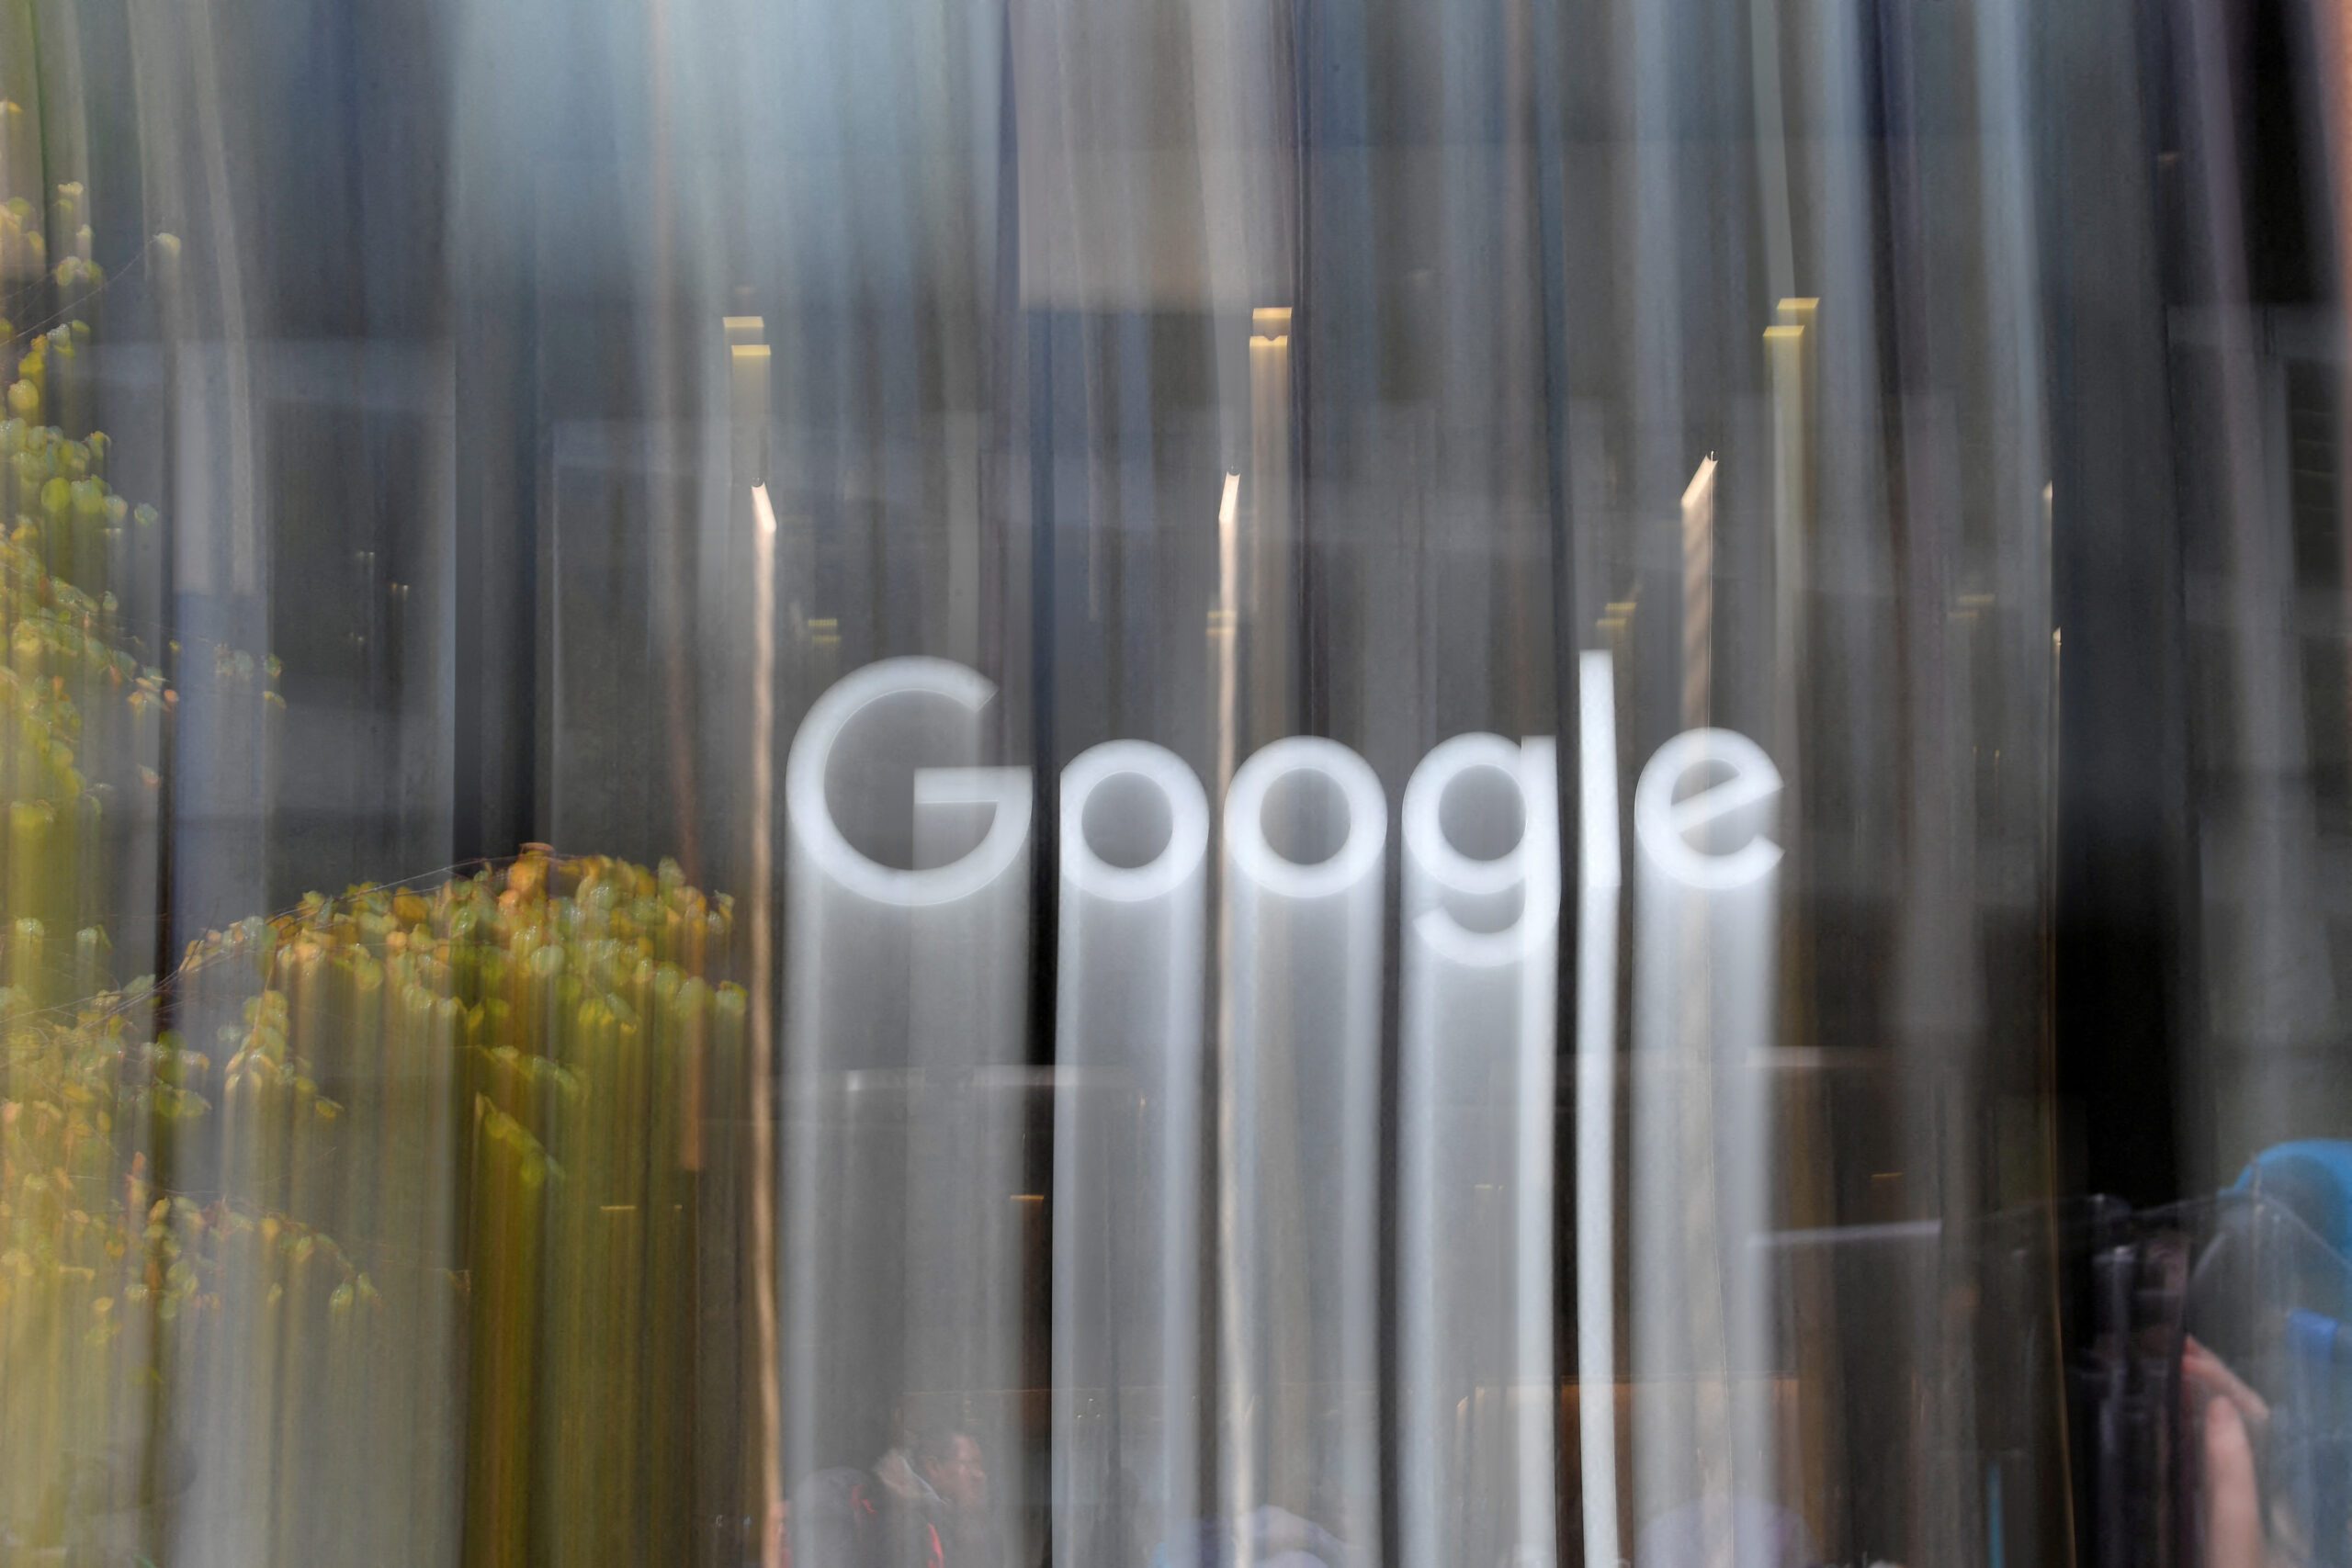 Why is the US suing Google for antitrust violations?